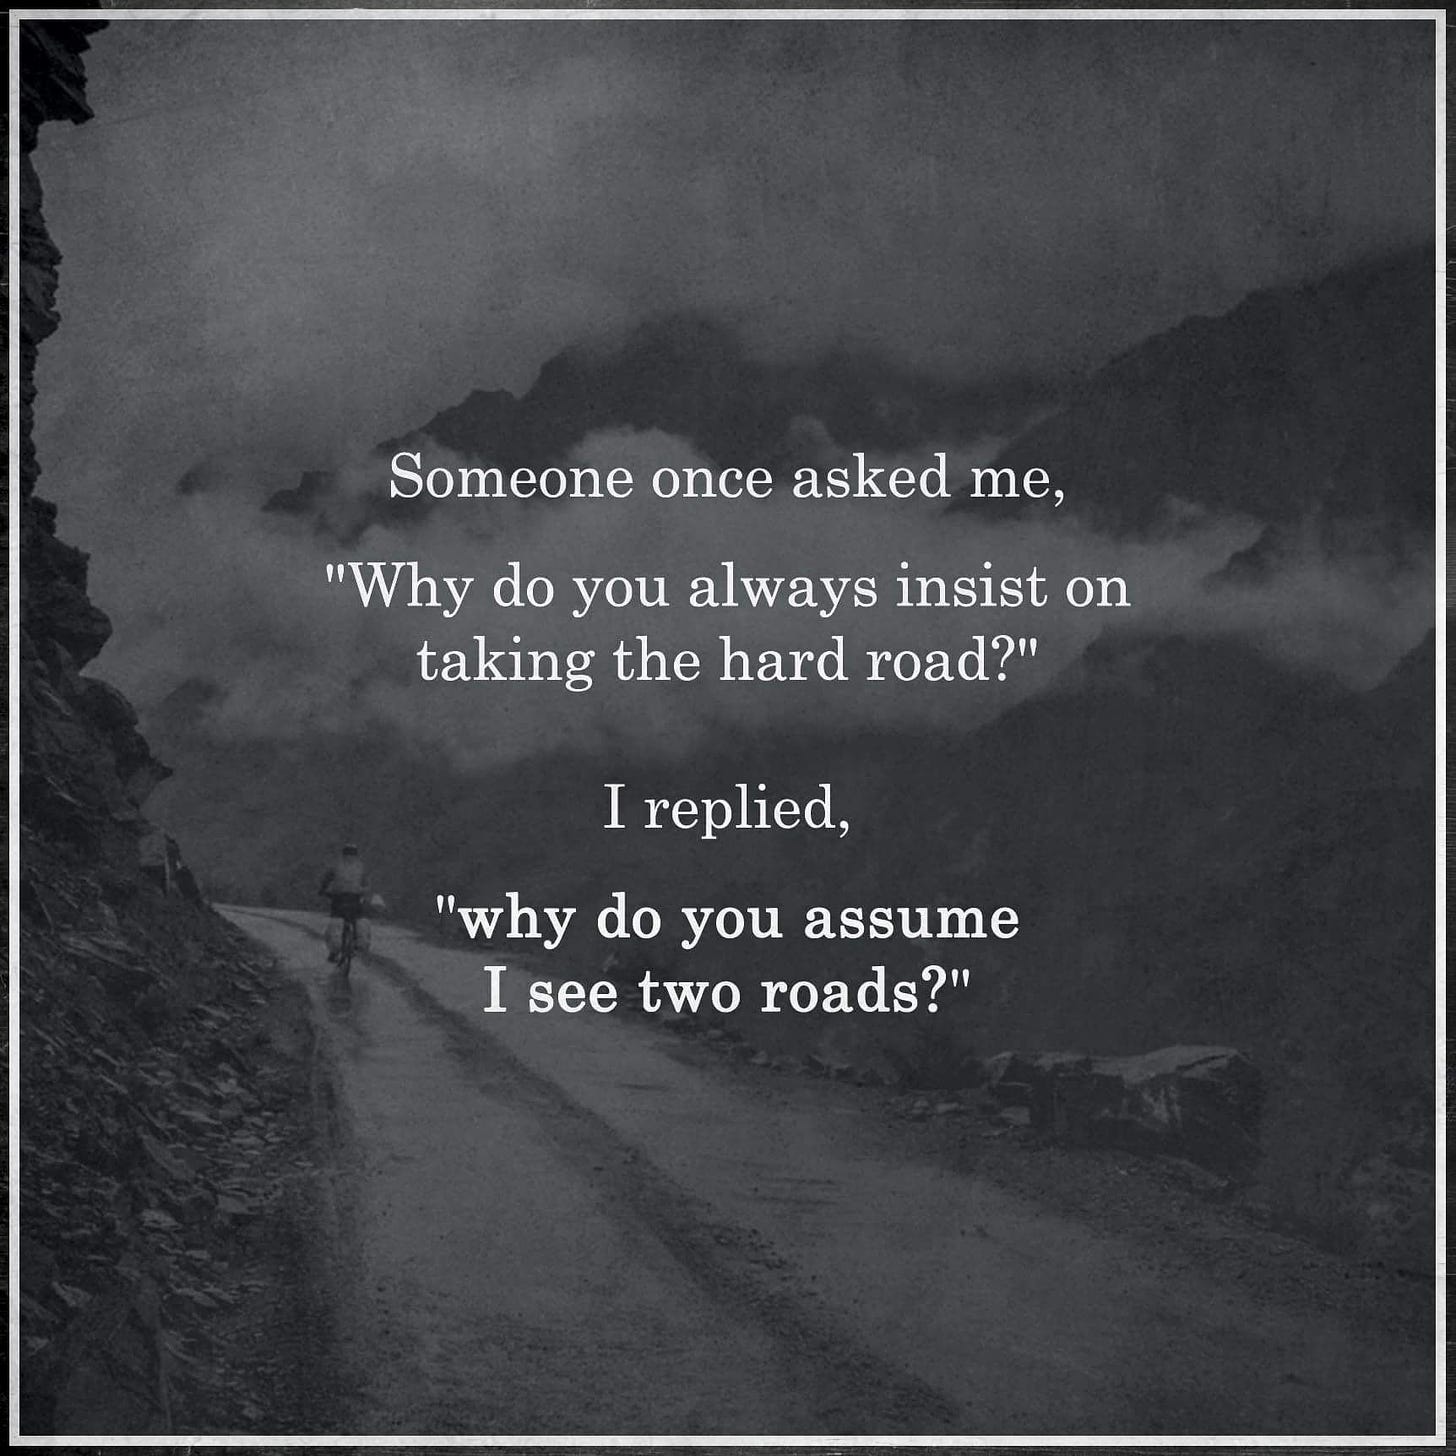 Why do you assume I see two roads?